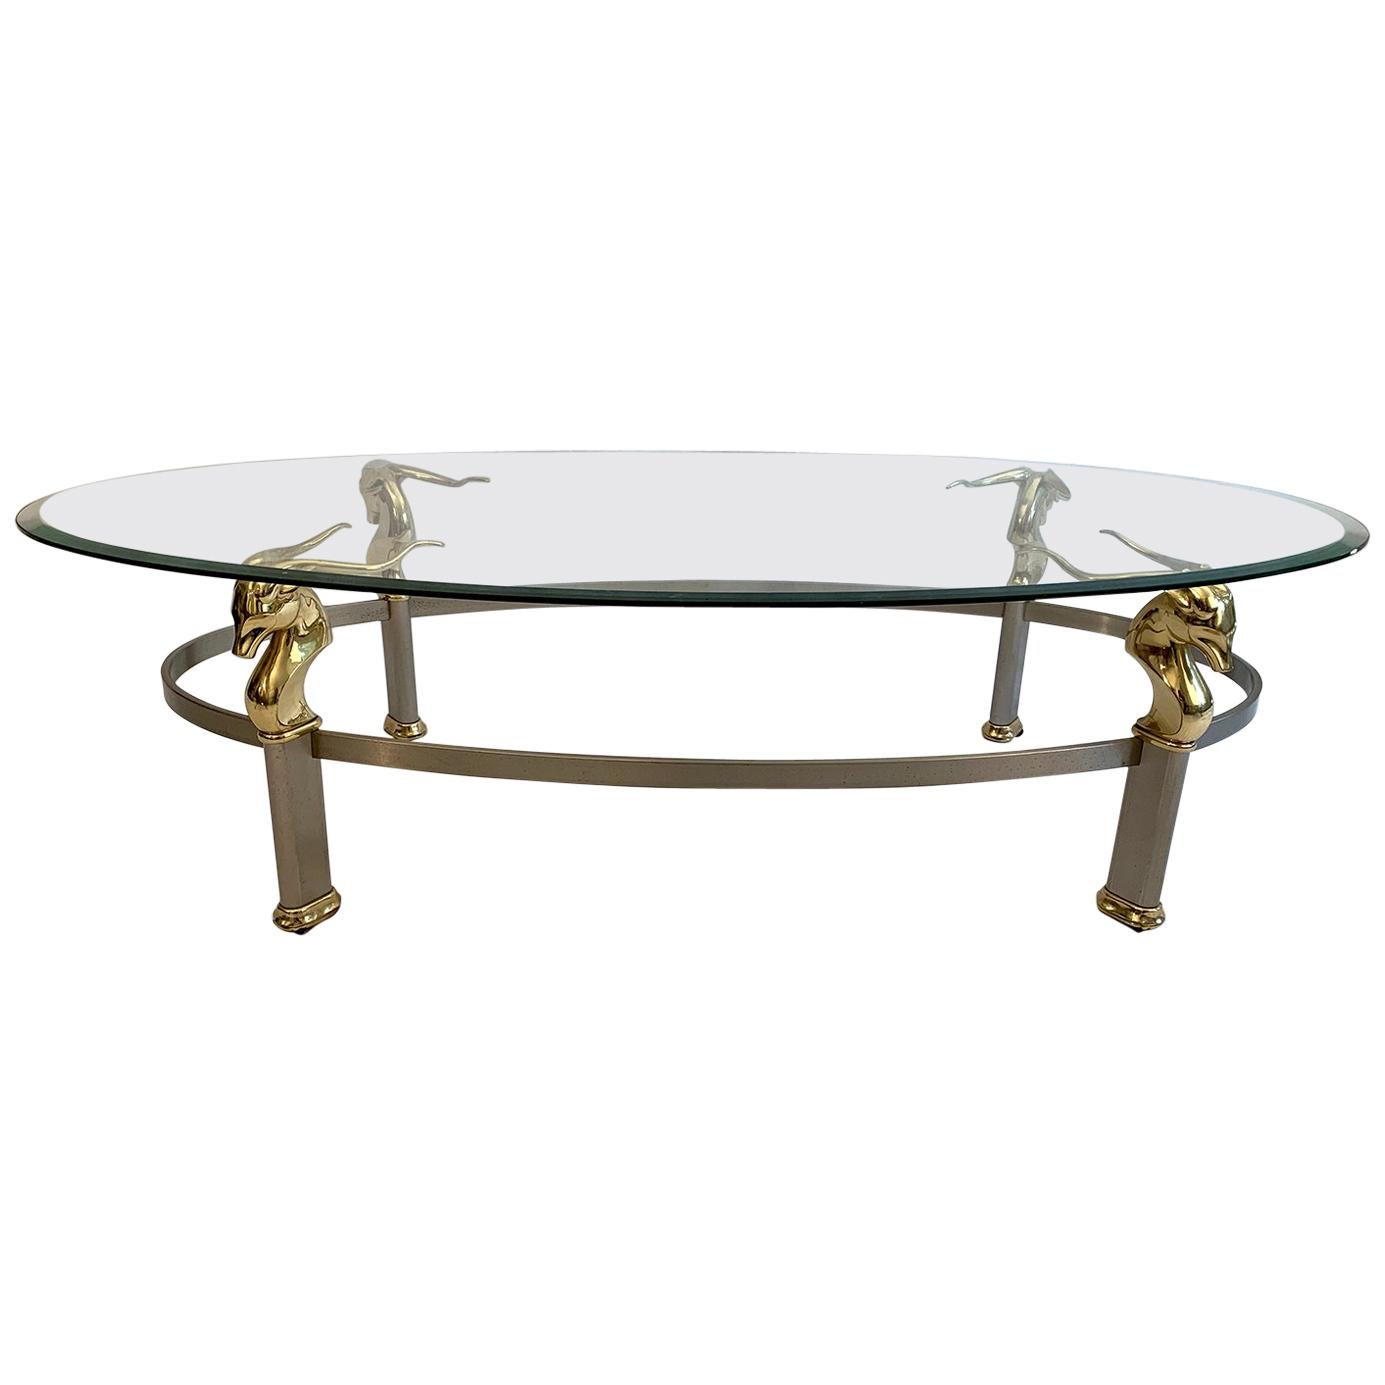 Antelope Coffee Table with Glass Top